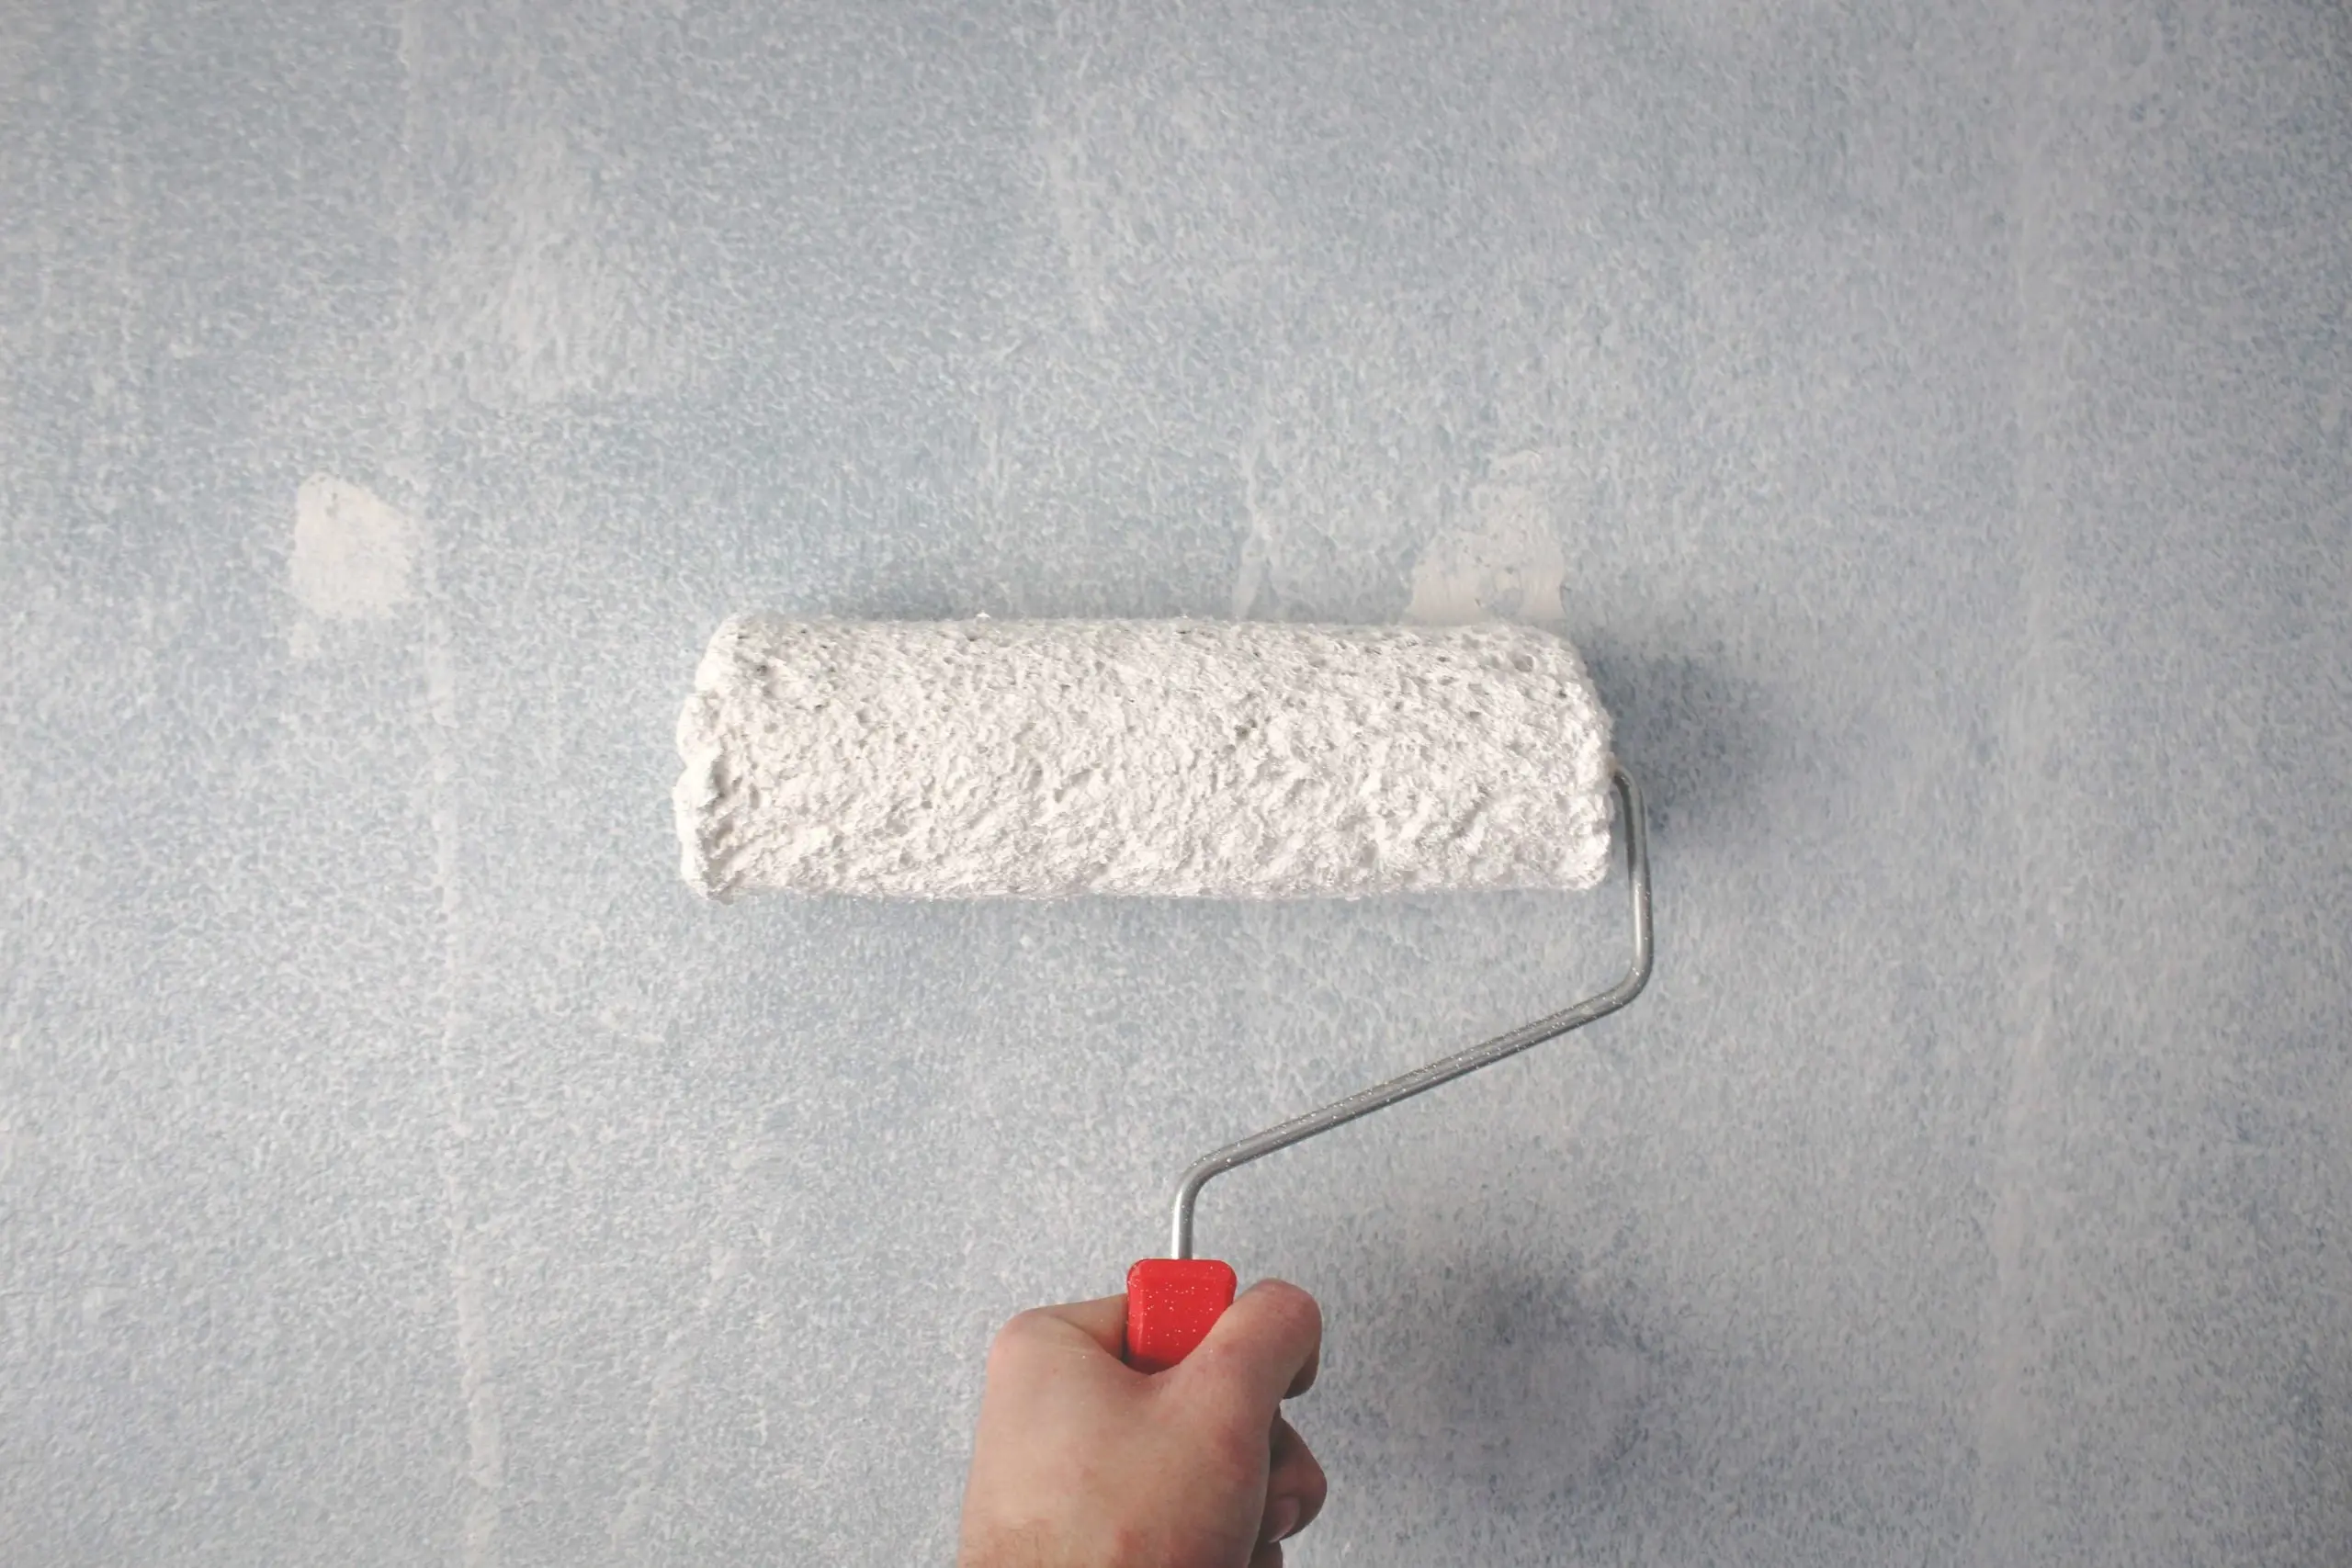 https://www.newwestern.com/wp-content/uploads/2023/01/person-holding-paint-roller-on-wall-1669754-1-scaled-1.jpg